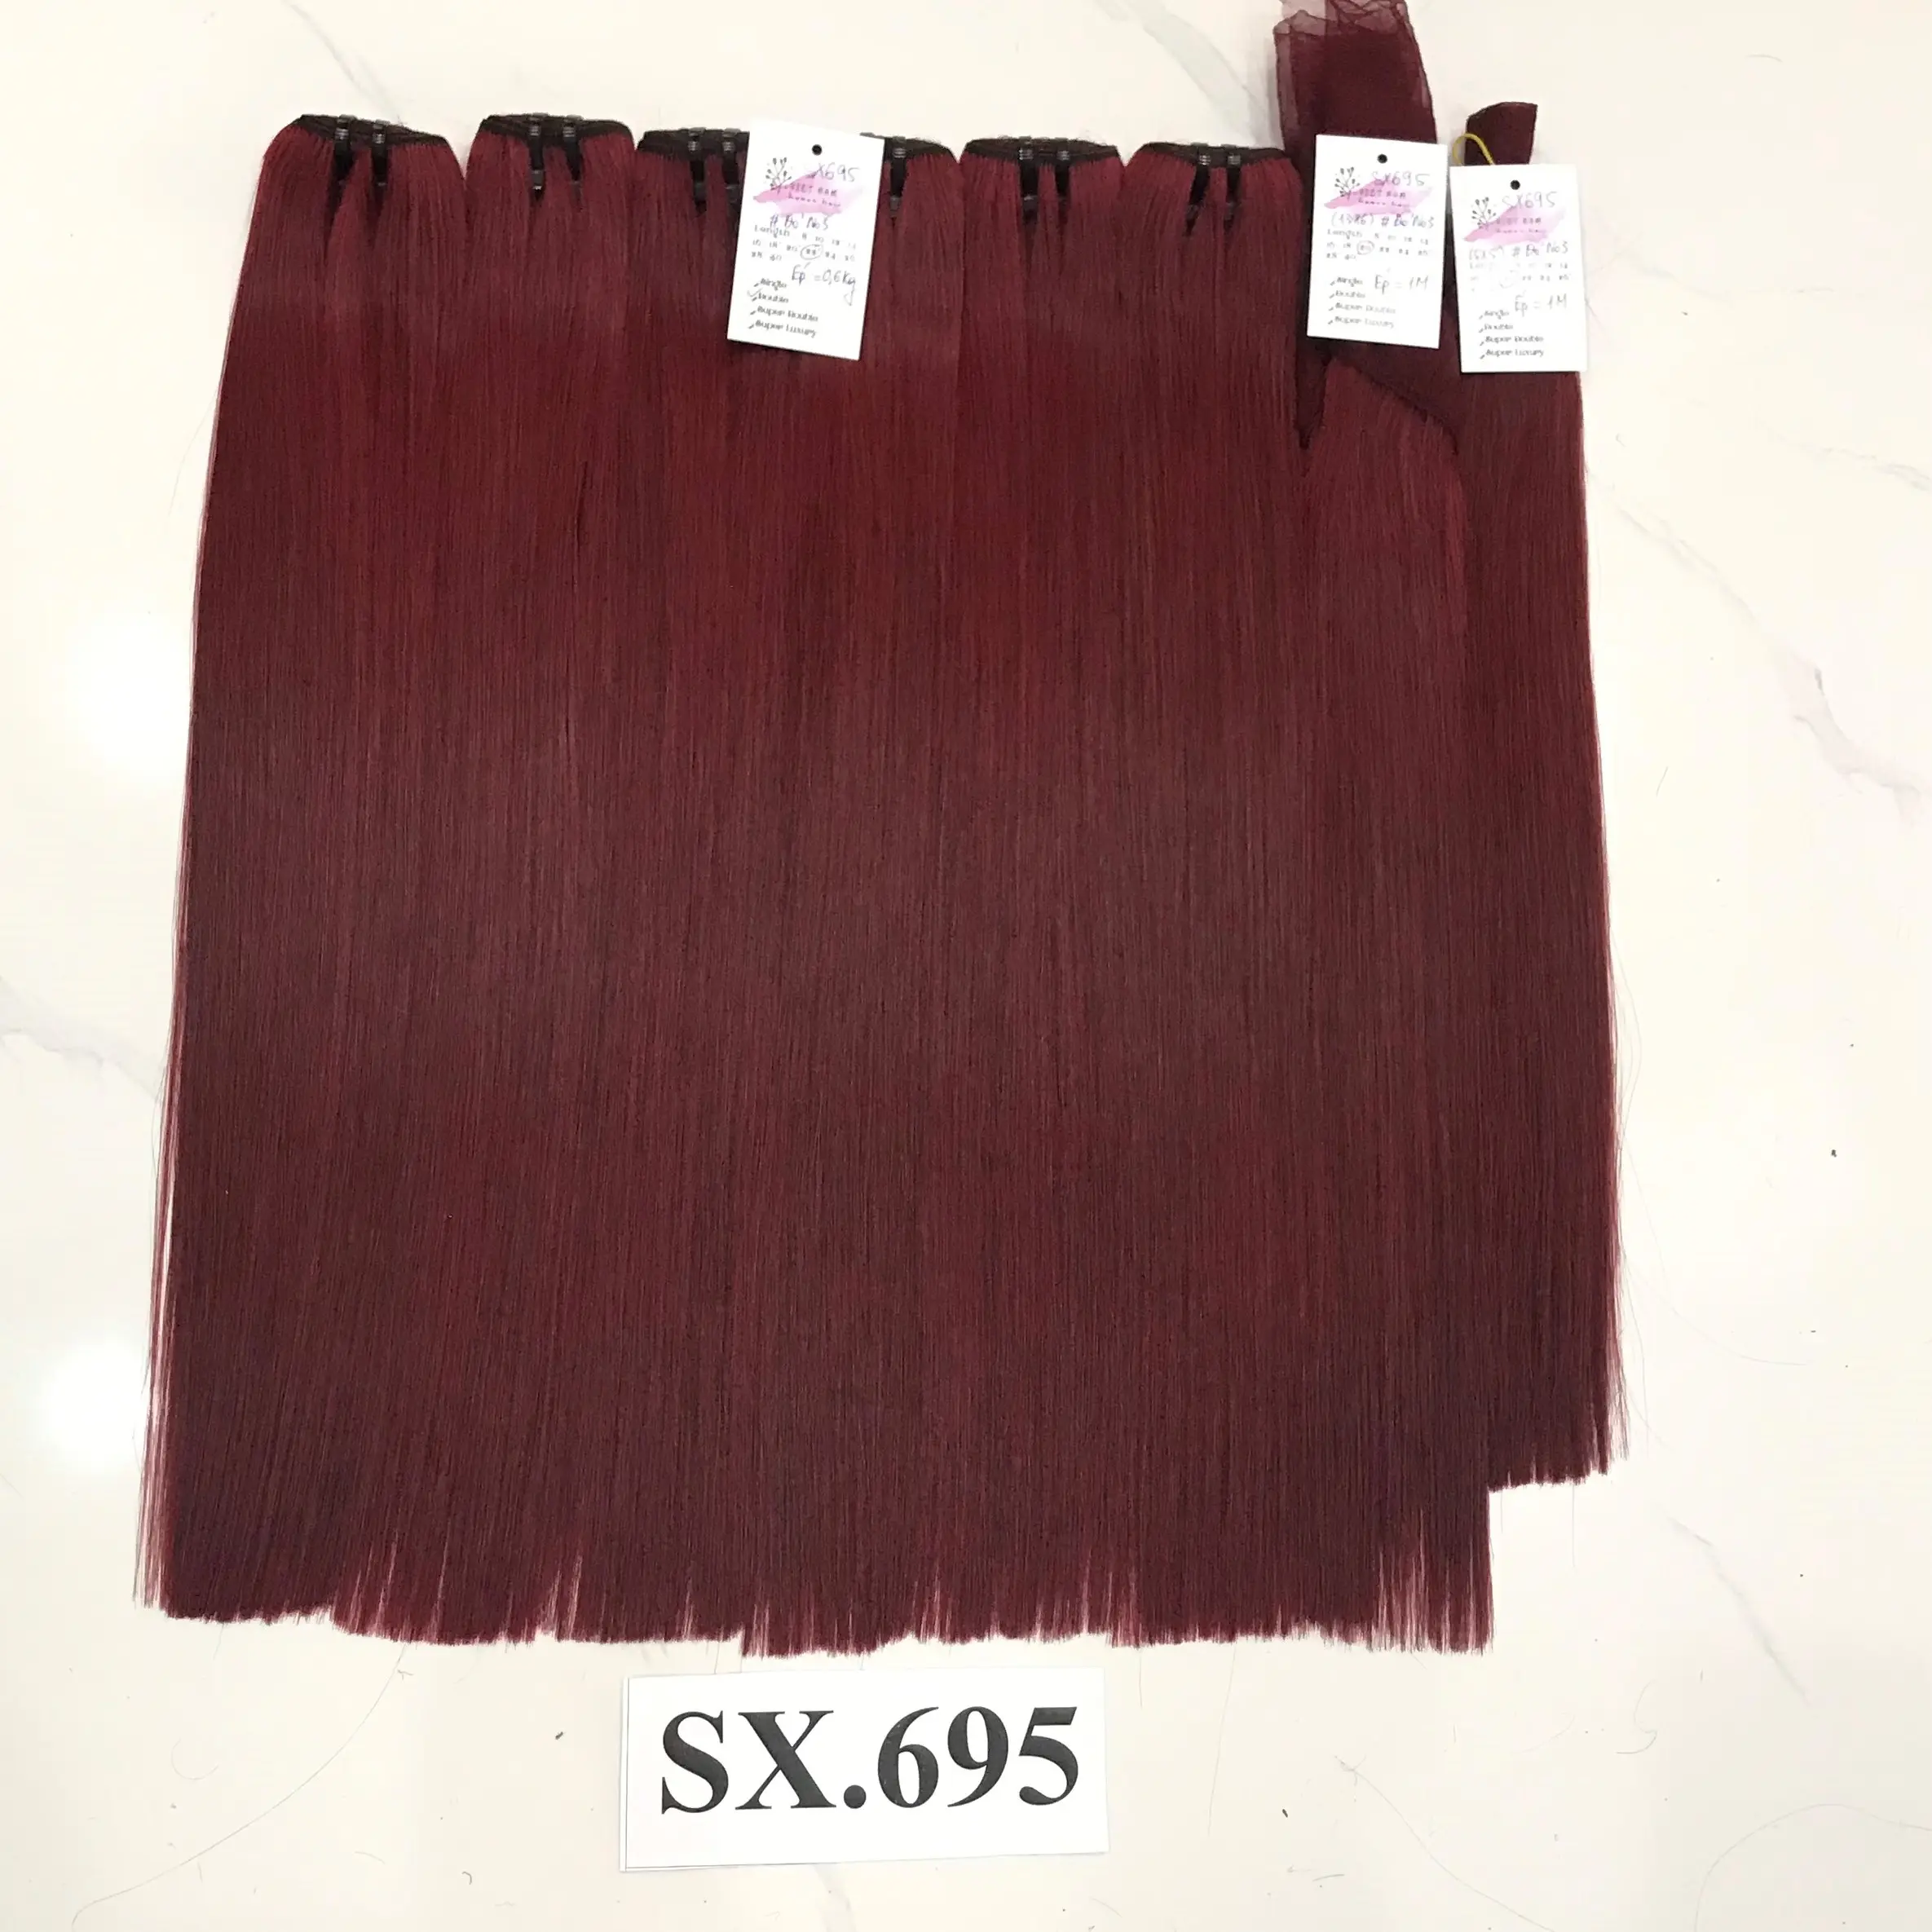 Factory Price Super Double Drawn Red Bone Straight Hair Extension Soft & Smooth Made From Raw Human Hair